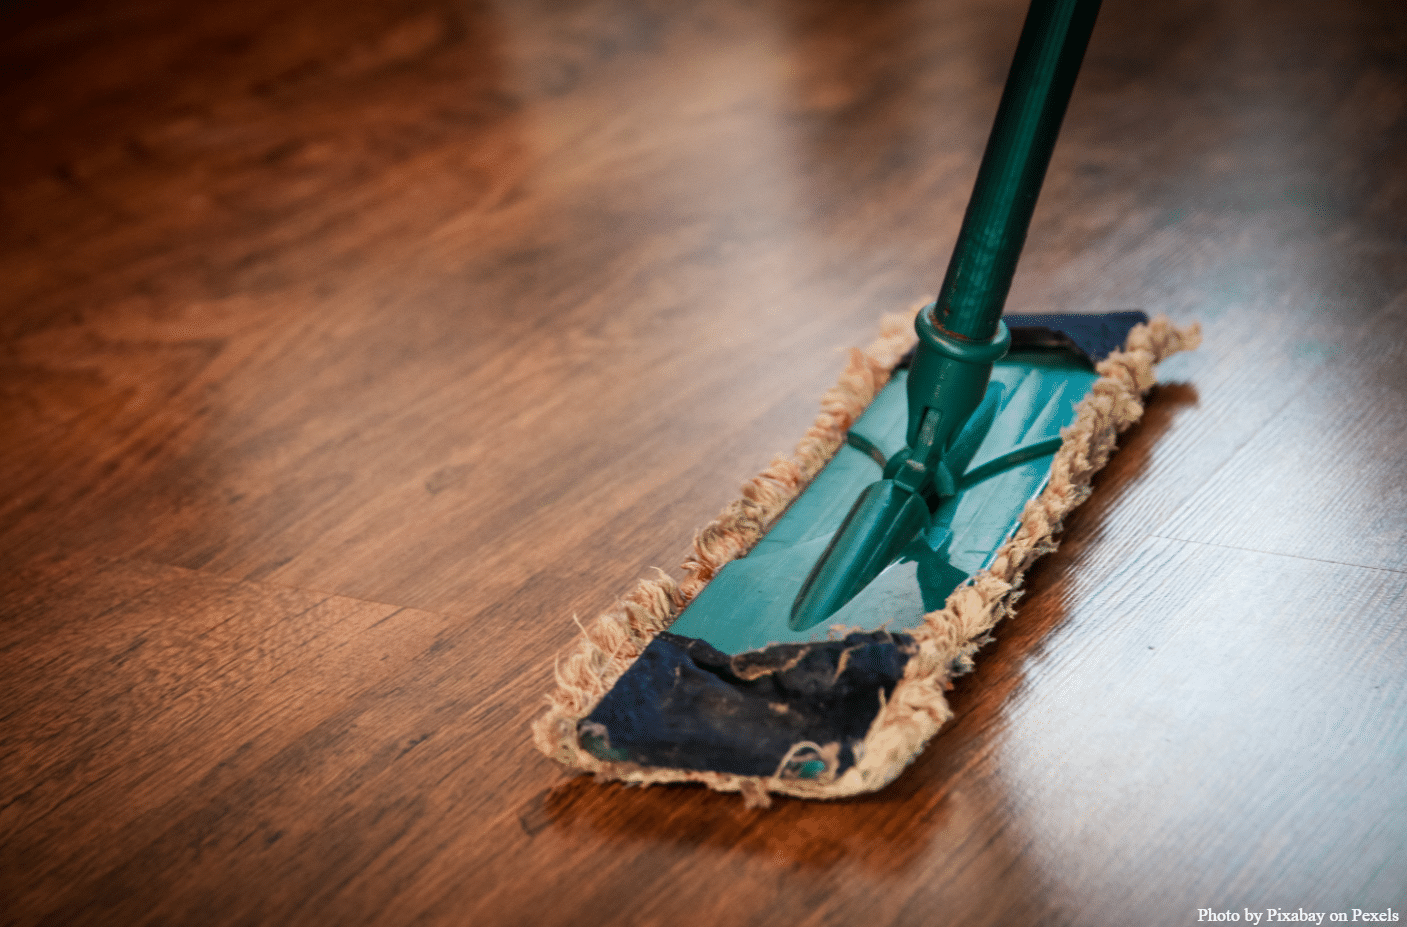 Wood Flooring Cleaning 101 The Right, How To Clean And Sanitize Hardwood Floors